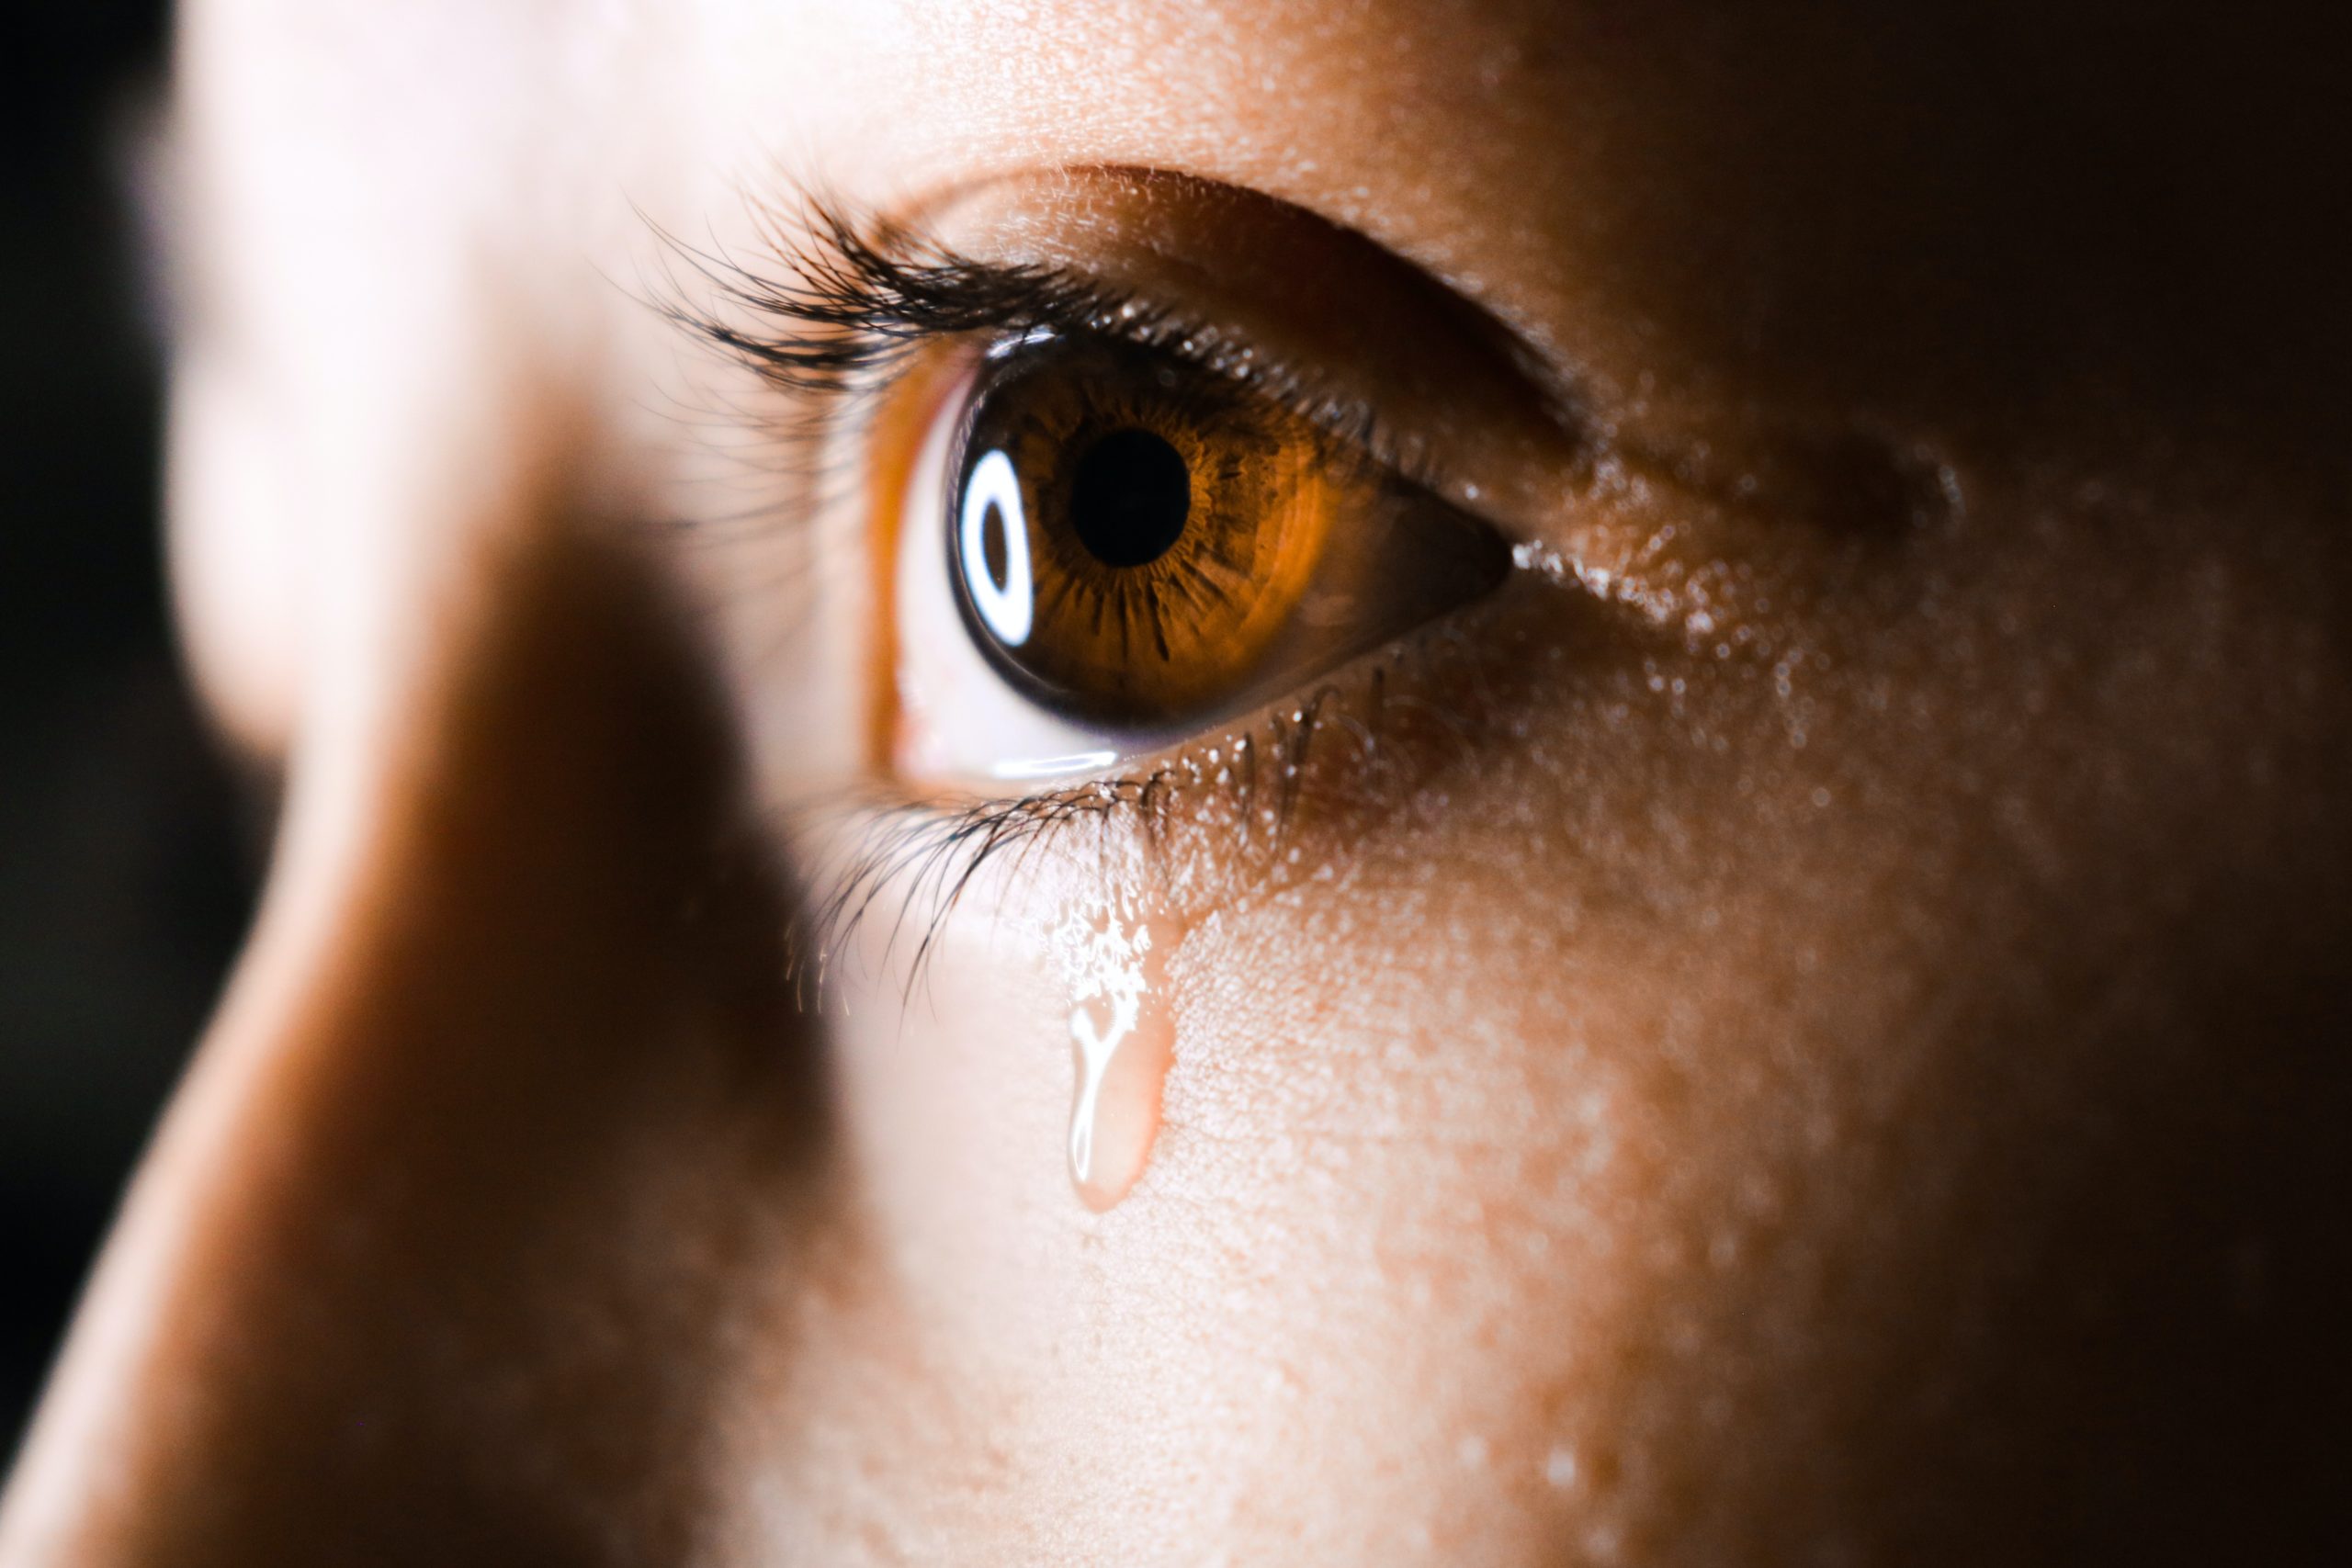 watery-eyes-no-i-m-not-crying-we-fix-eyes